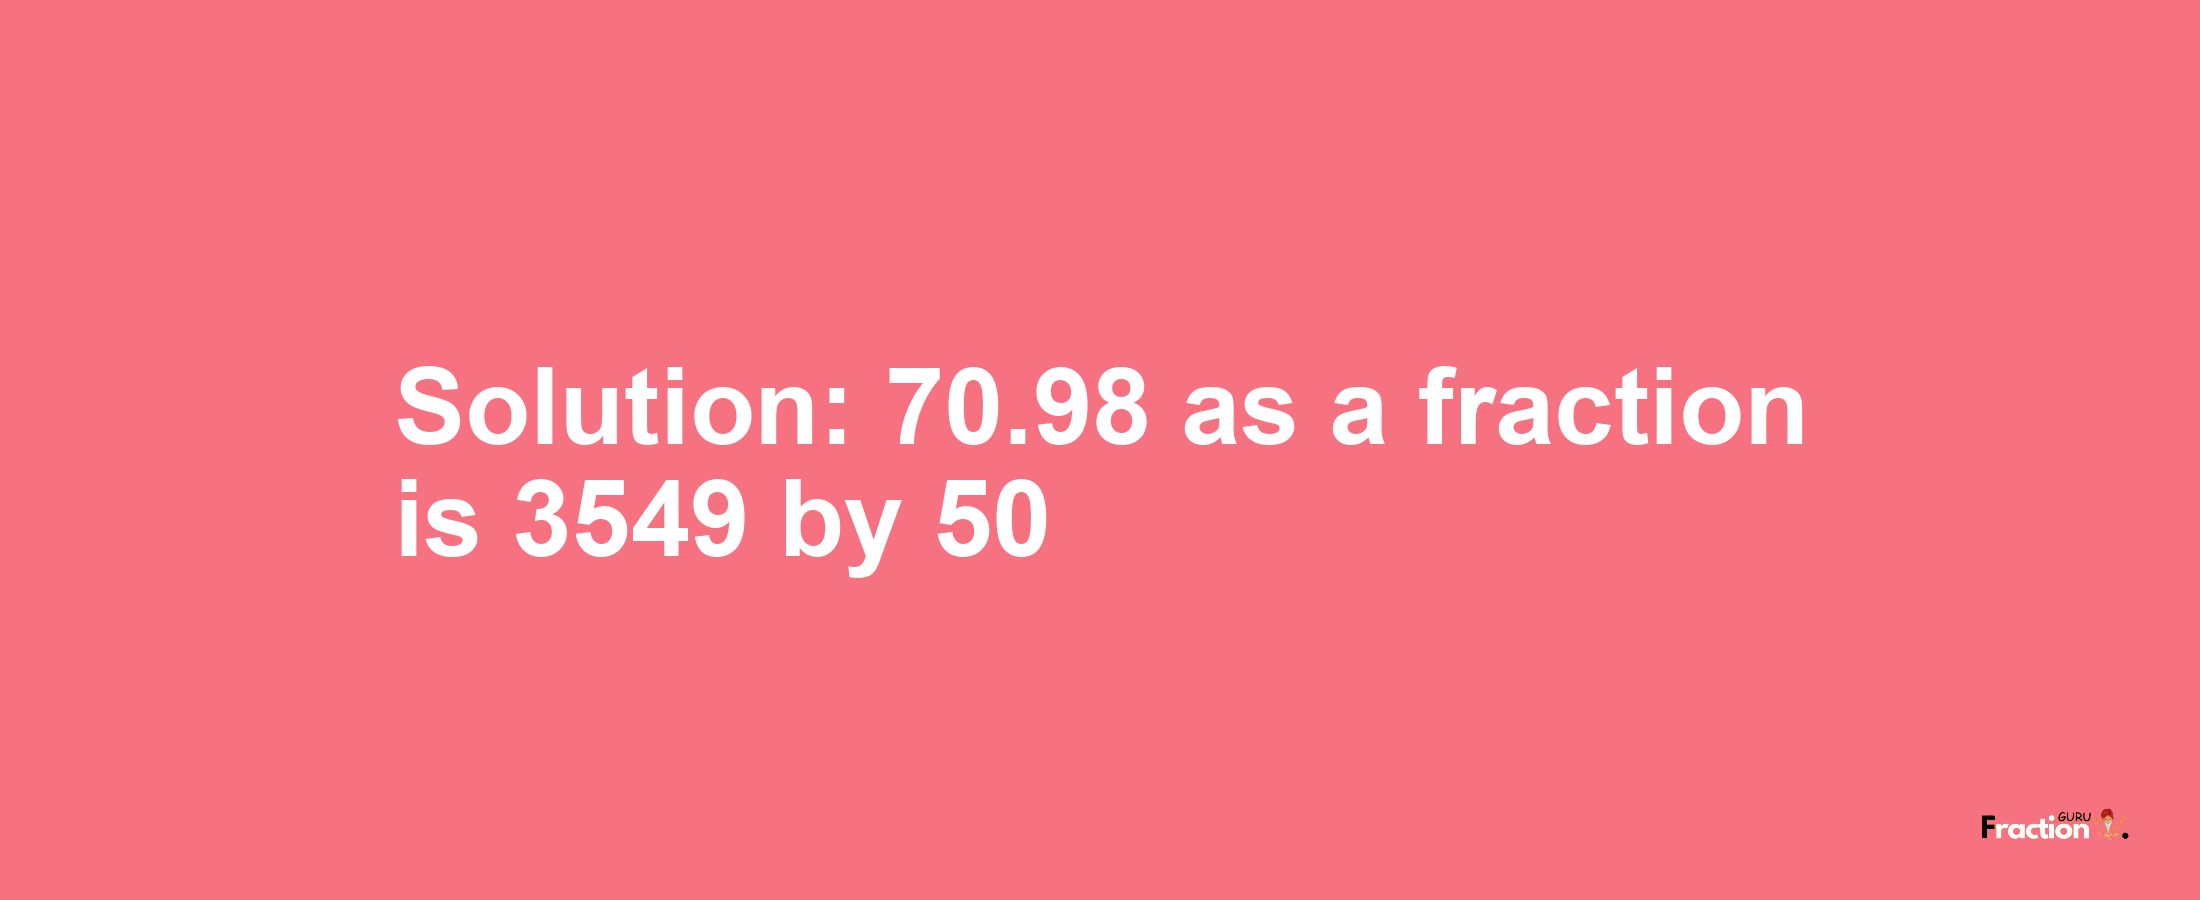 Solution:70.98 as a fraction is 3549/50